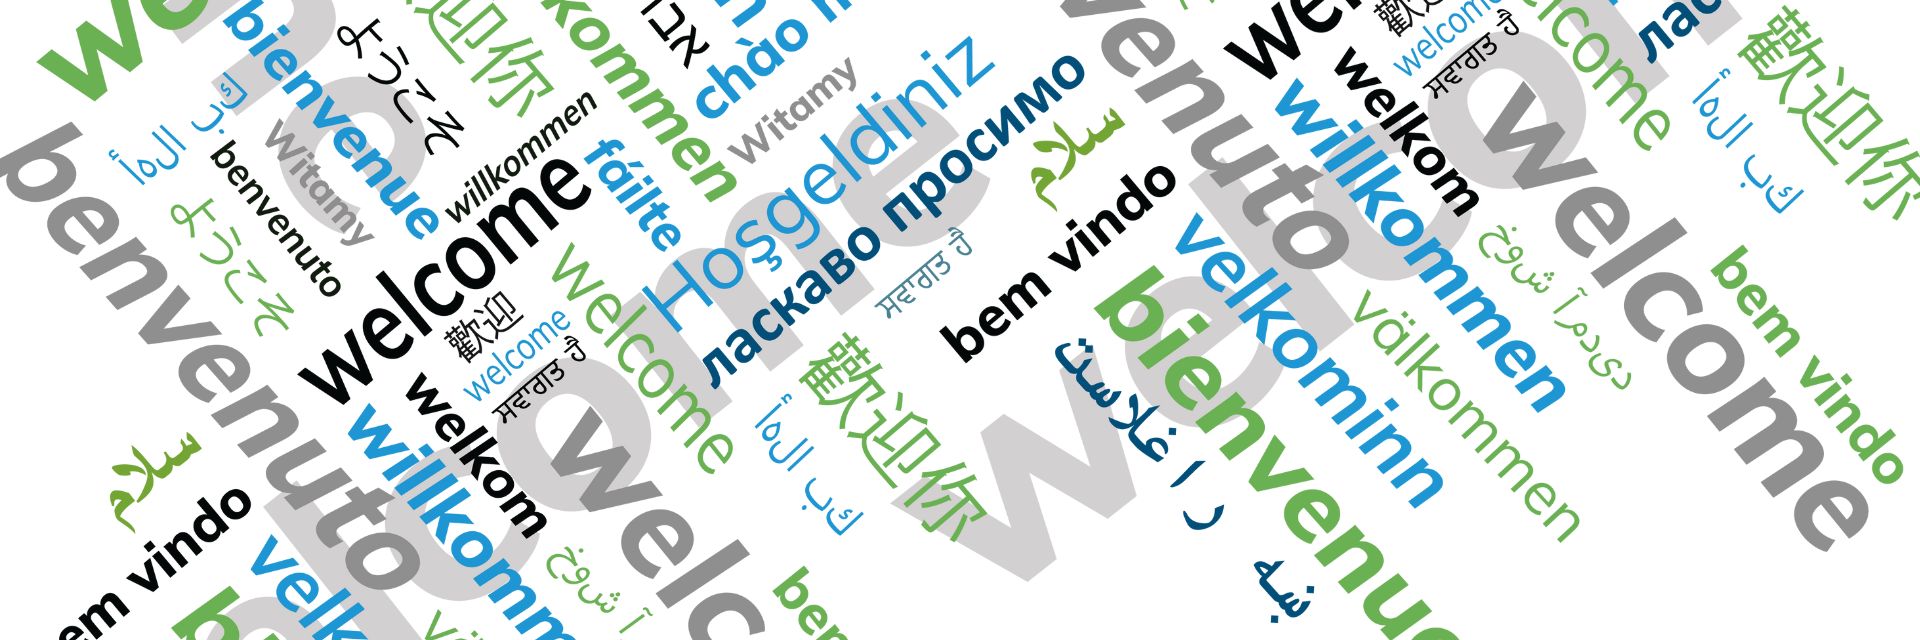 Multilingual word cloud saying "Welcome" in various languages.